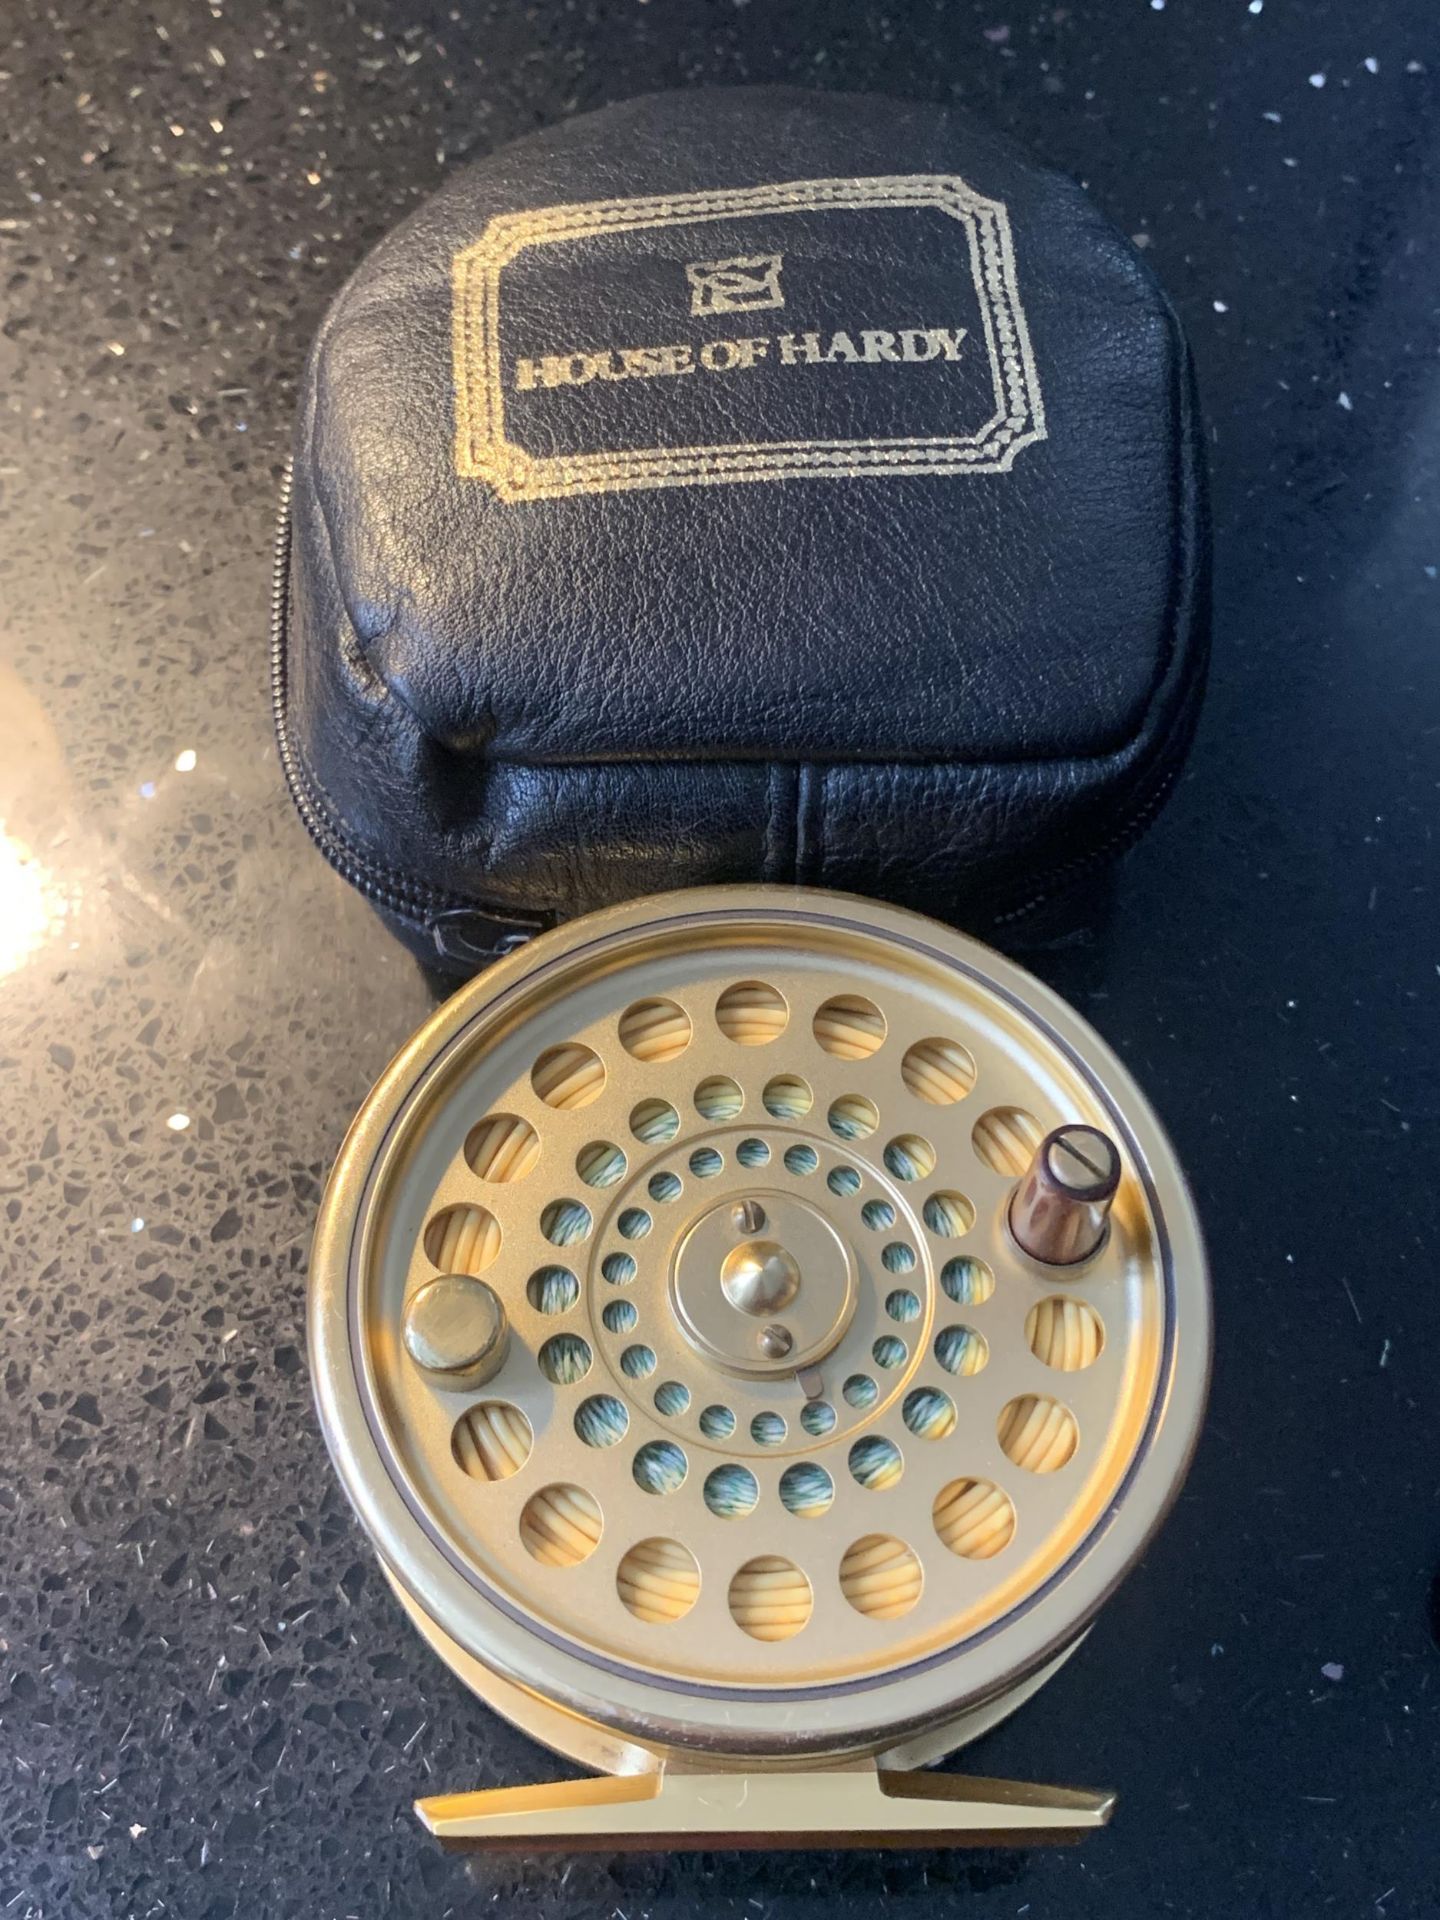 A HARDY SOVEREIGN 7/8 LTD EDITION NO.188 TROUT FLY FISHING REEL LOADED WITH HARDY DT7F LINE IN A